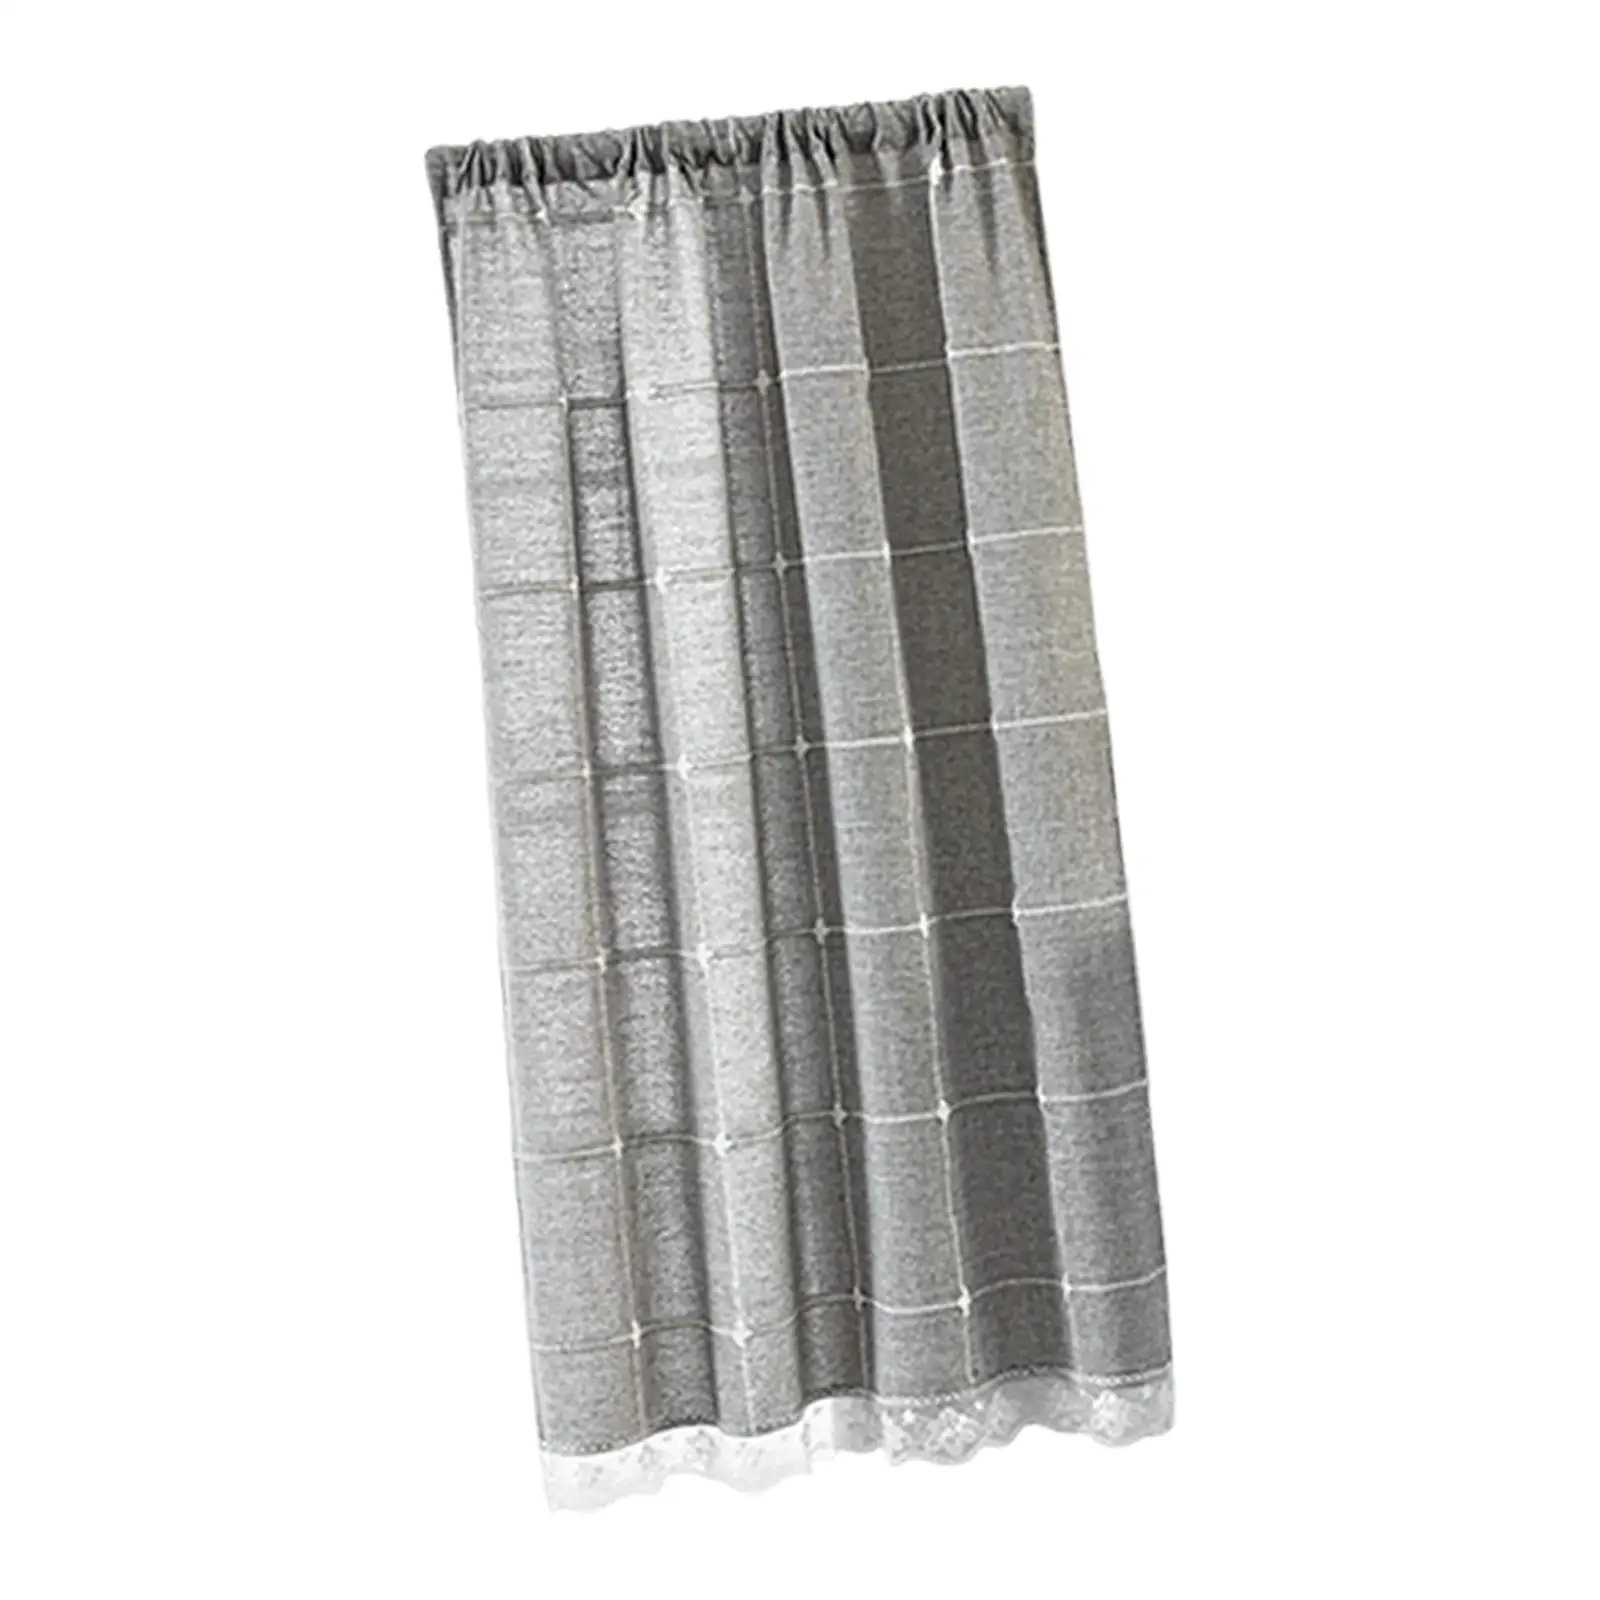 Stylish Rod Pocket Curtains 51inch Long 39inch Width Translucent Privacy Drapes